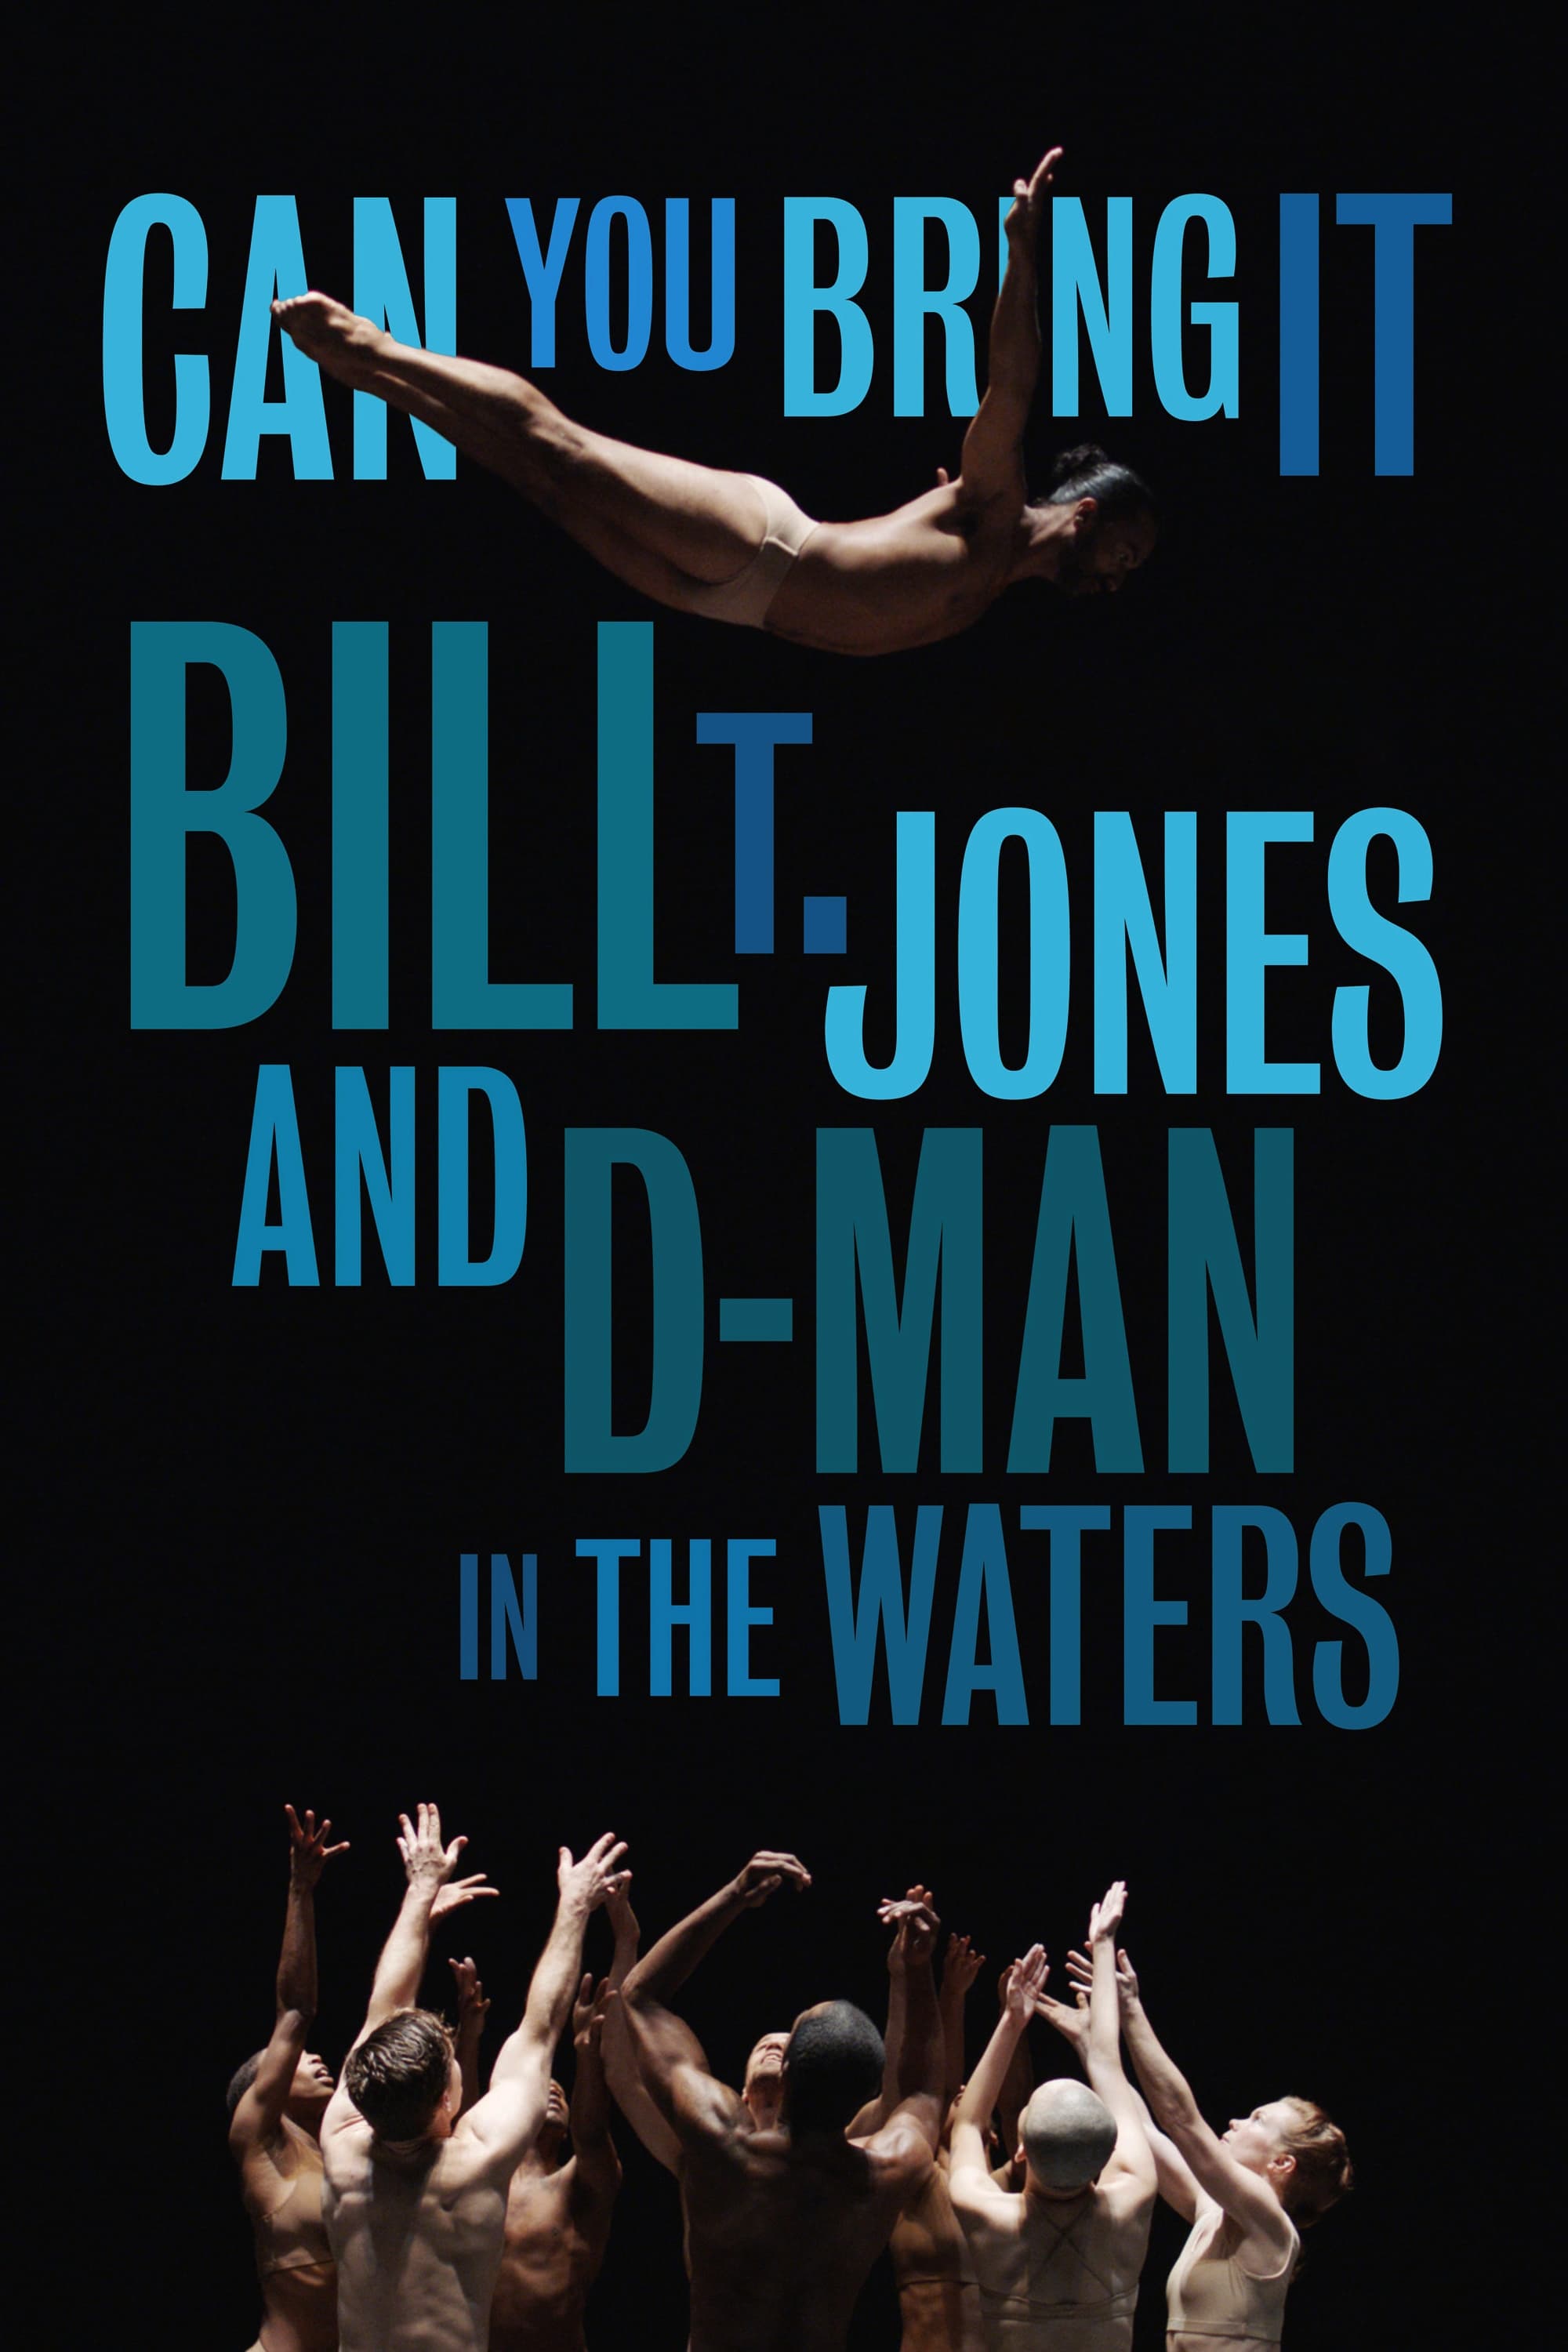 Can You Bring It: Bill T. Jones and D-Man in the Waters